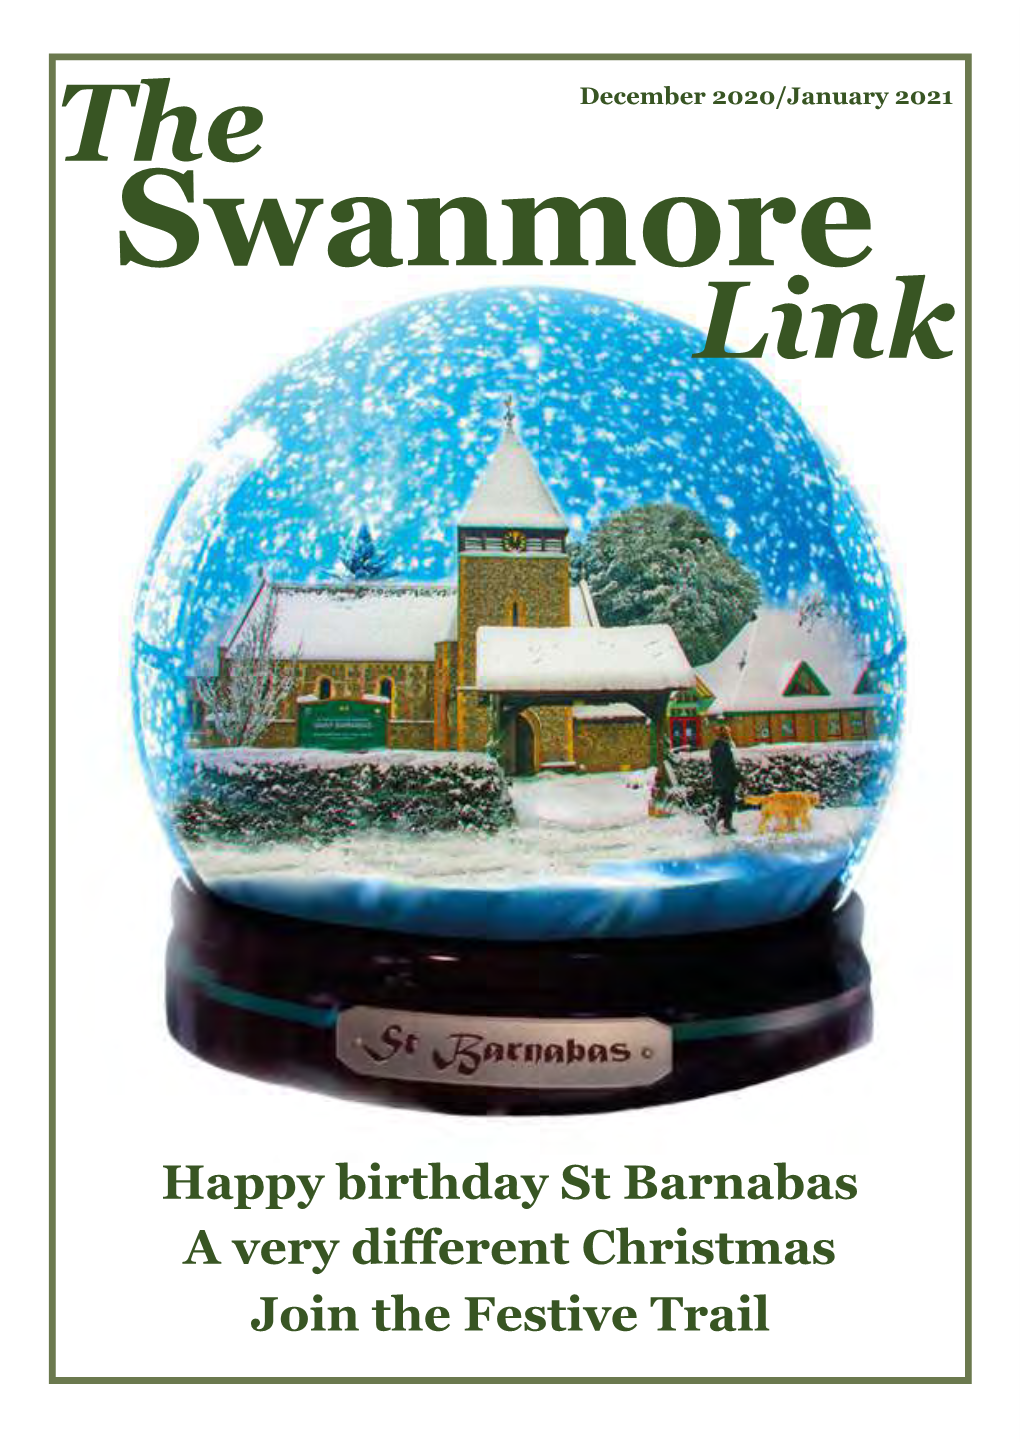 The Swanmore Link: December 2020/January 2021